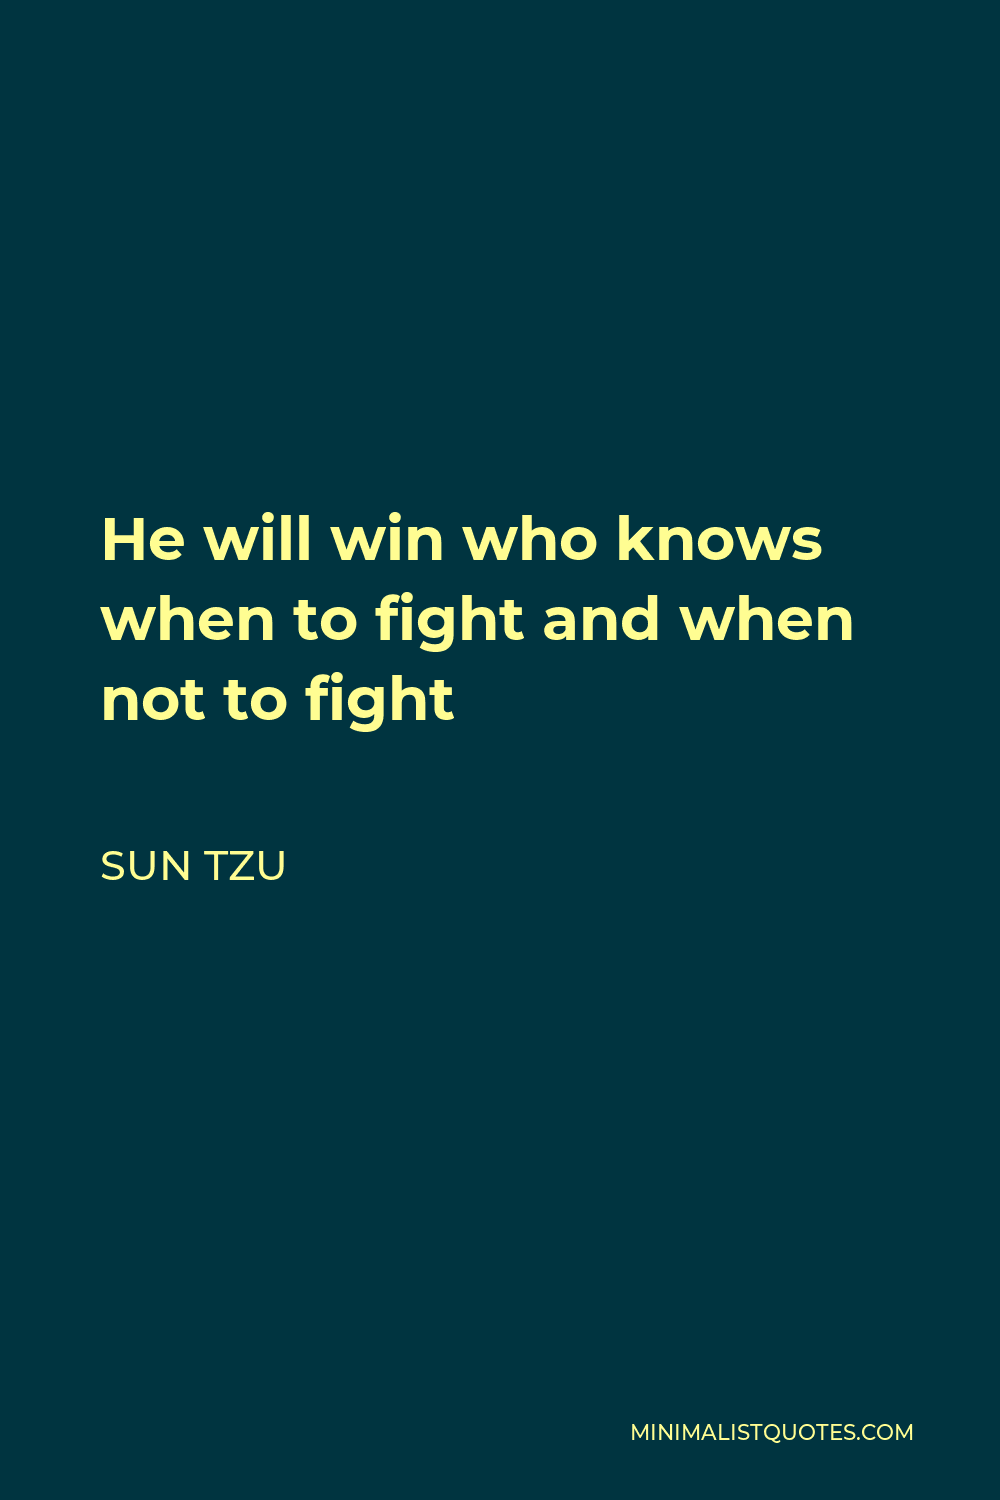 Sun Tzu Quote - He will win who knows when to fight and when not to fight